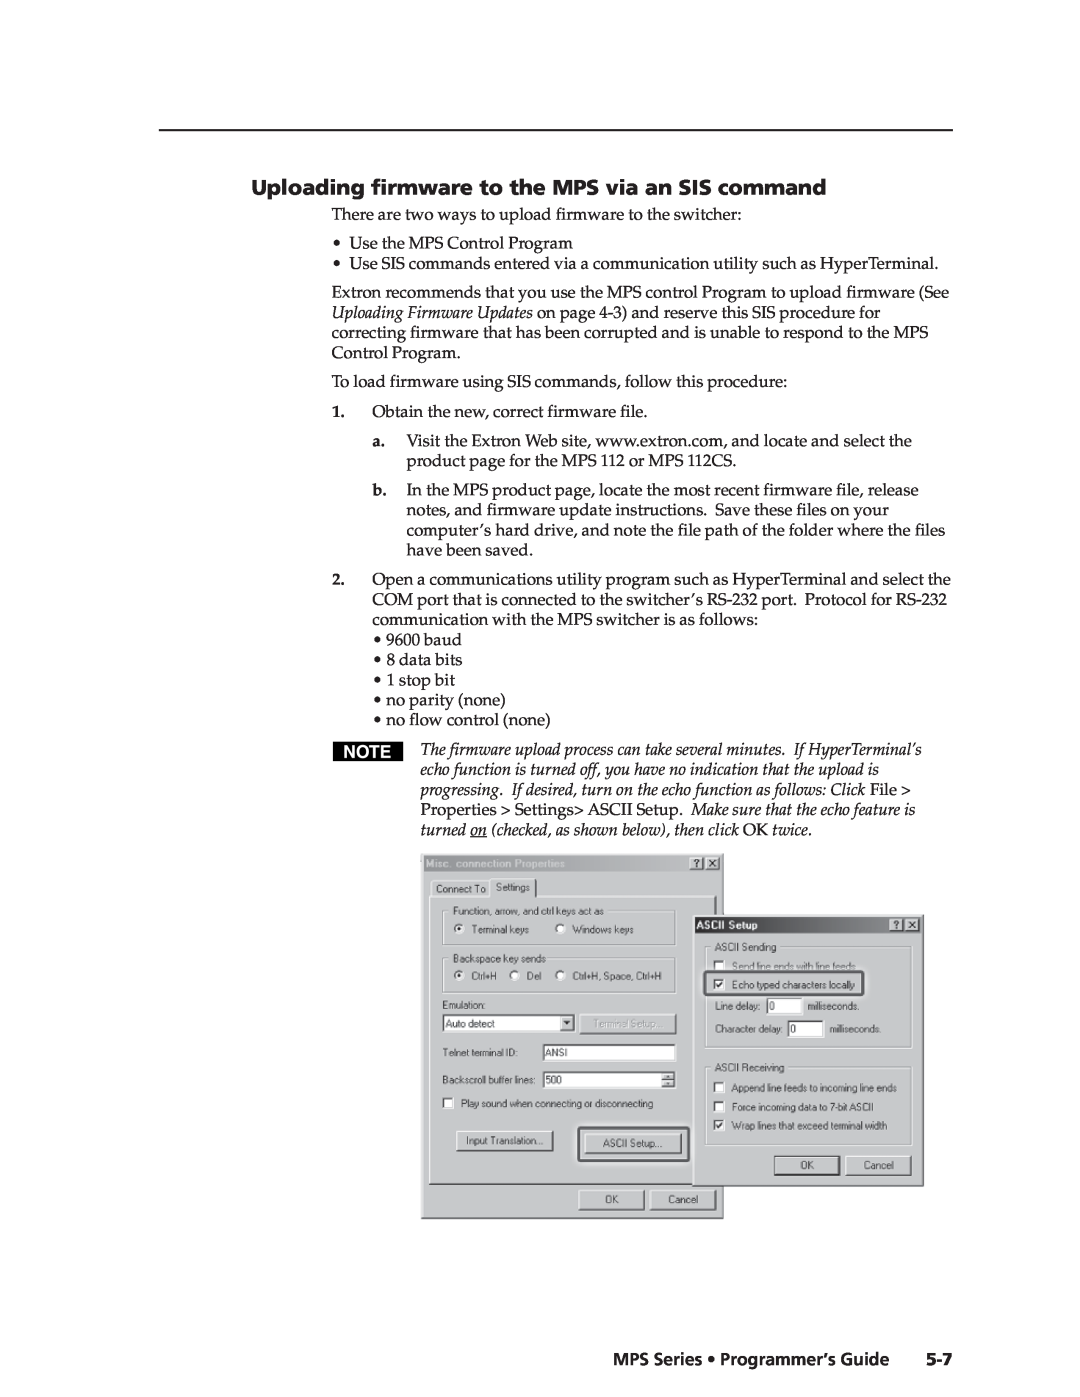 Extron electronic MPS 112CS manual Uploading firmware to the MPS via an SIS command, MPS Series Programmer’s Guide 